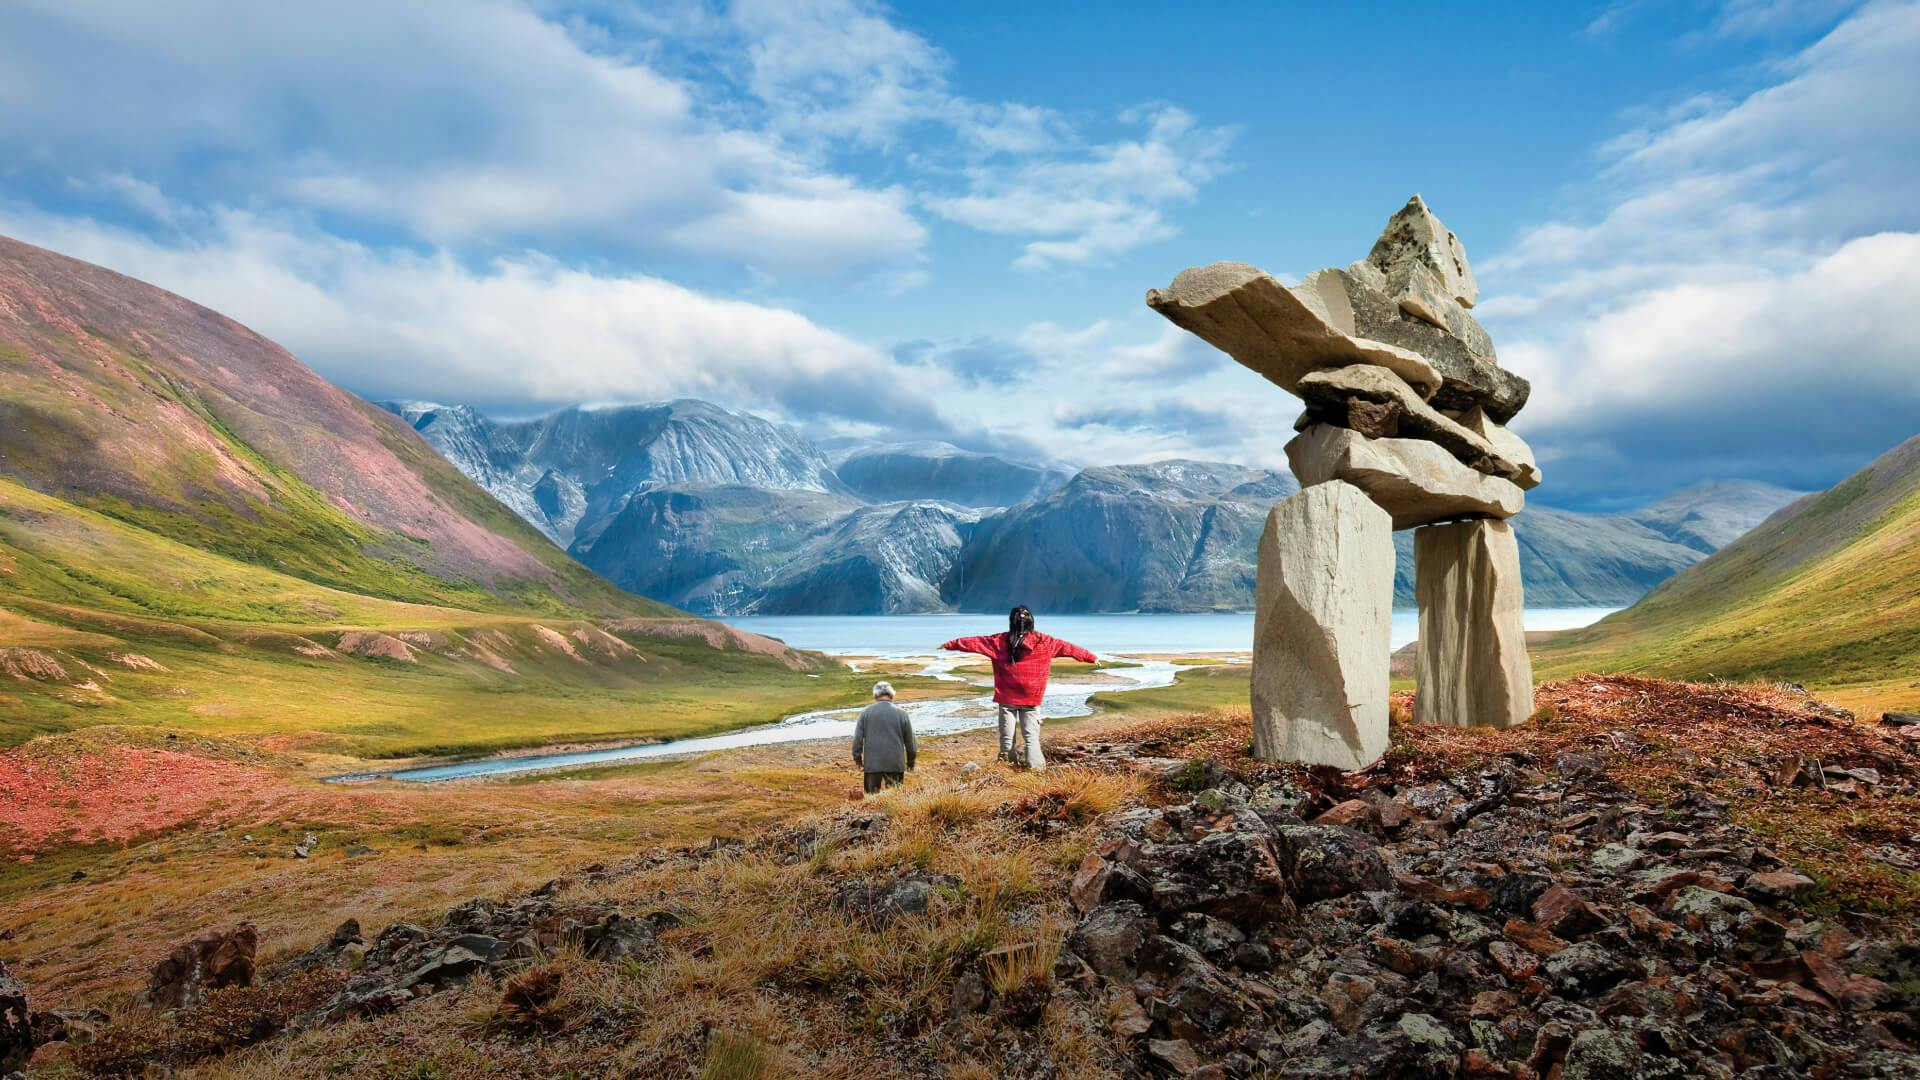 A man and child are taking in the view of the mountains beside an inukshuk in Labrador.